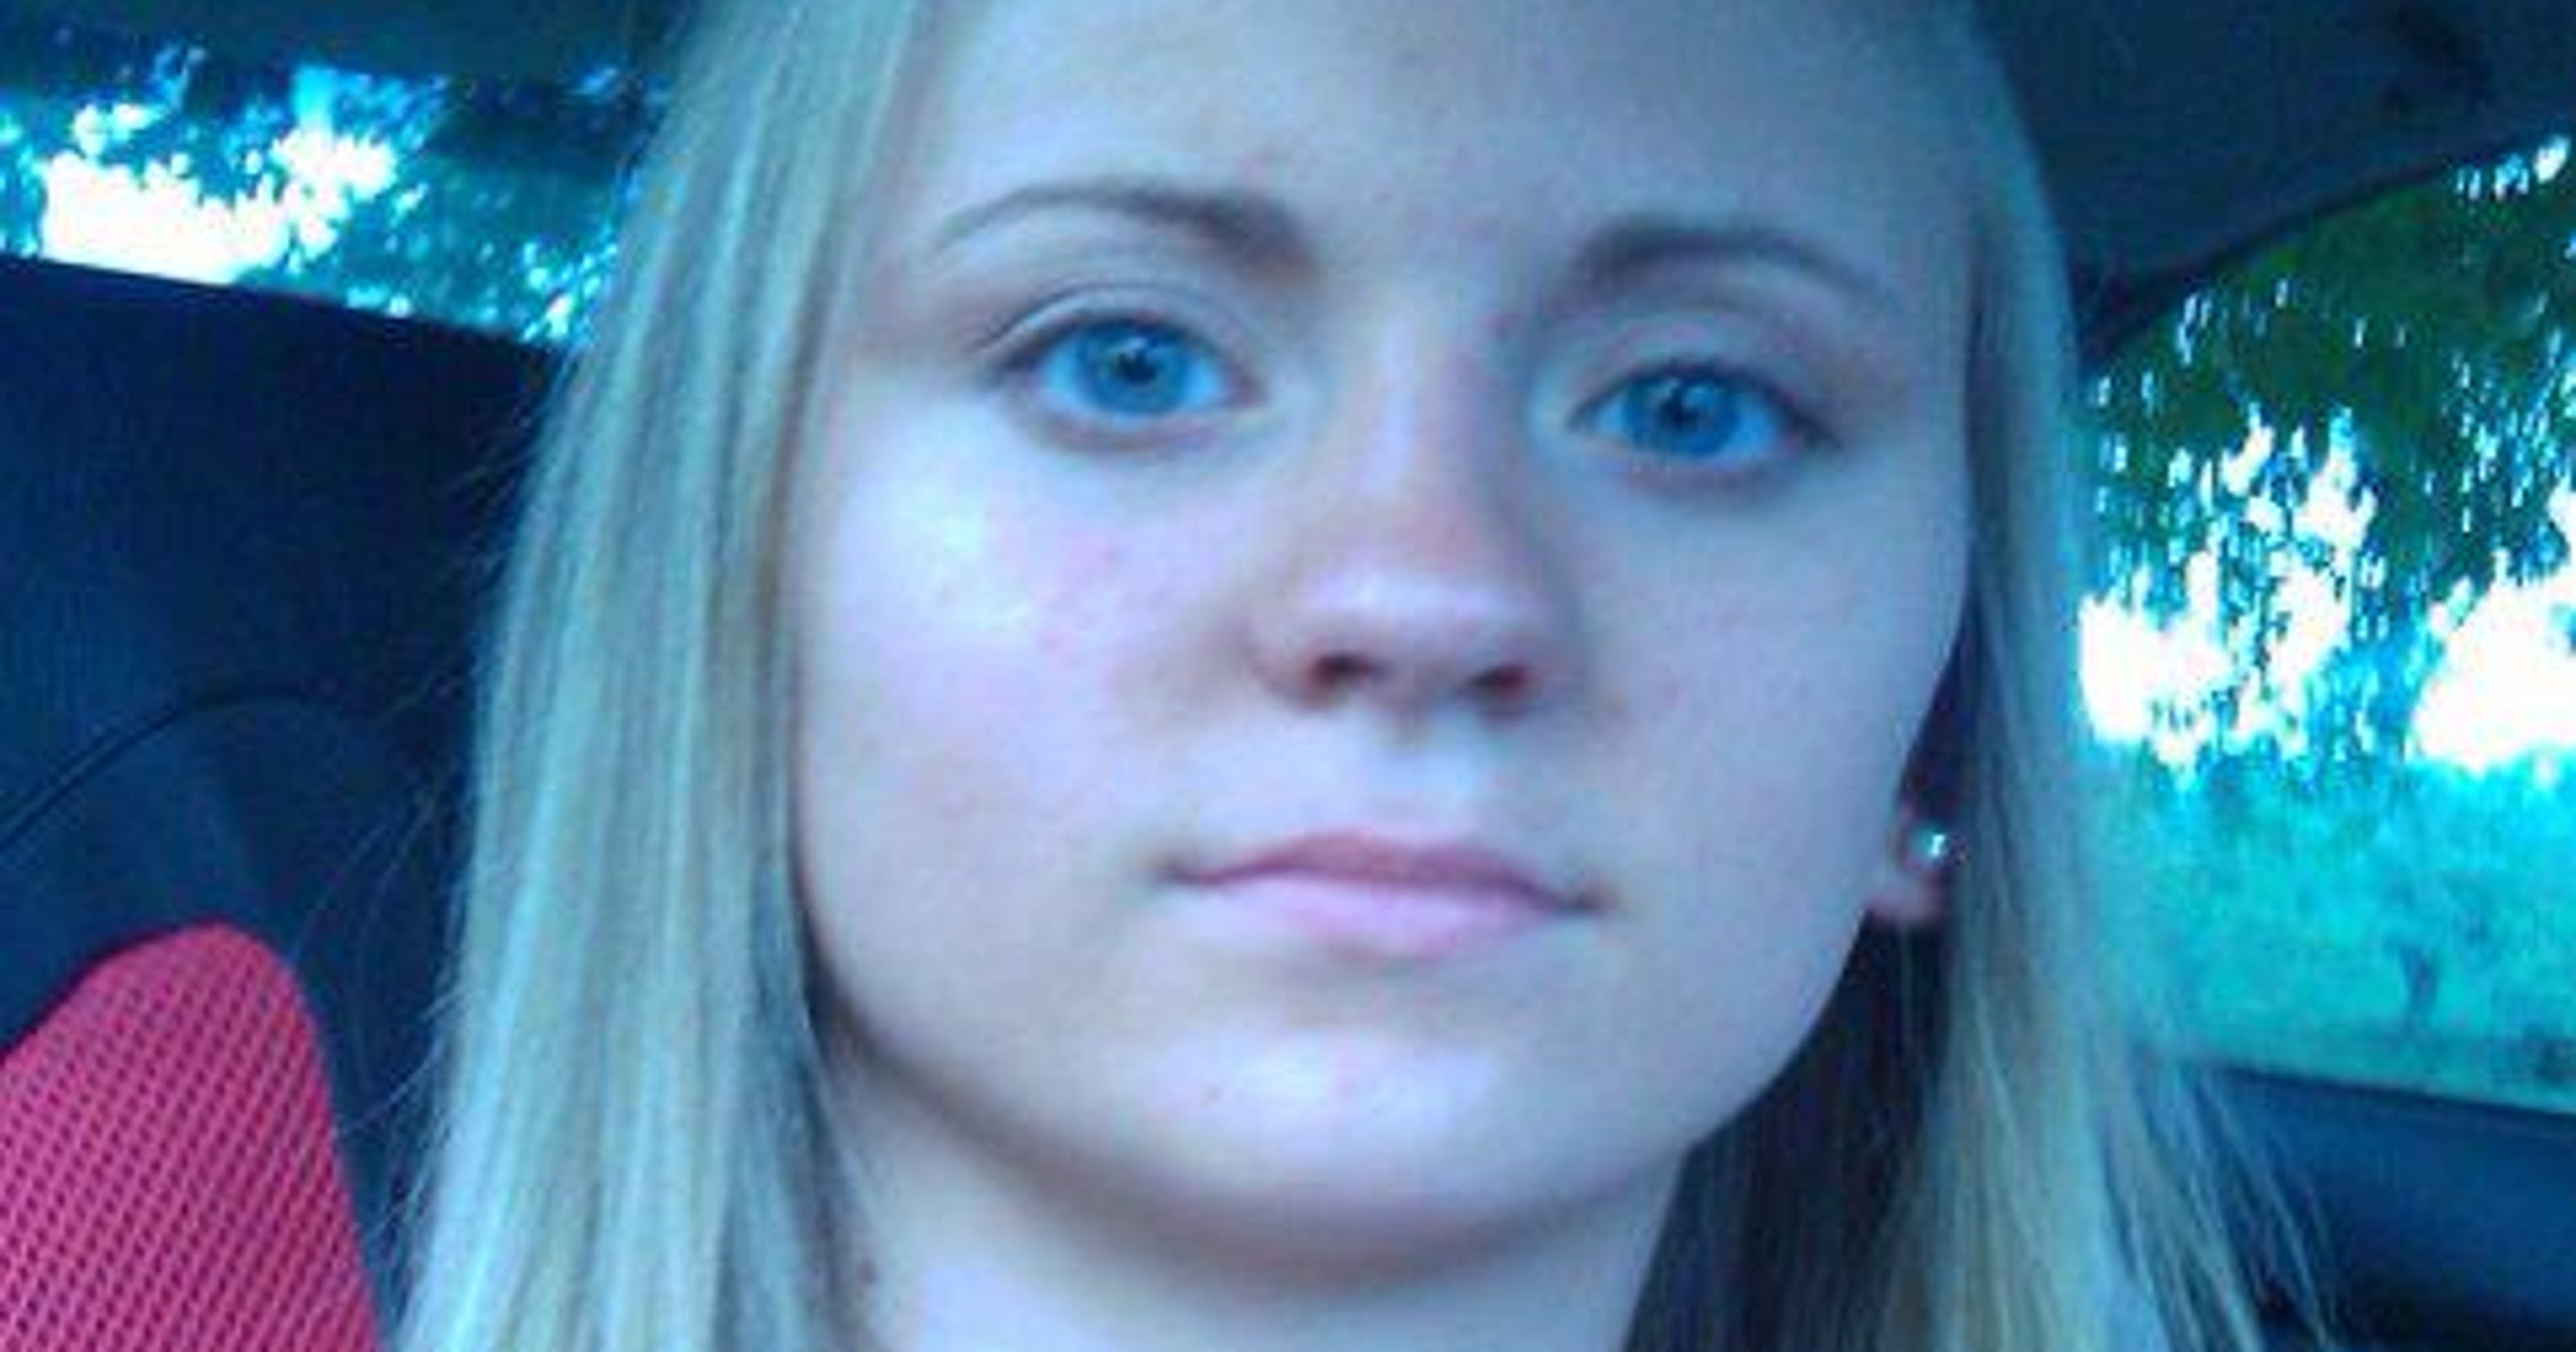 Suspect Indicted In Jessica Chambers Burning Death